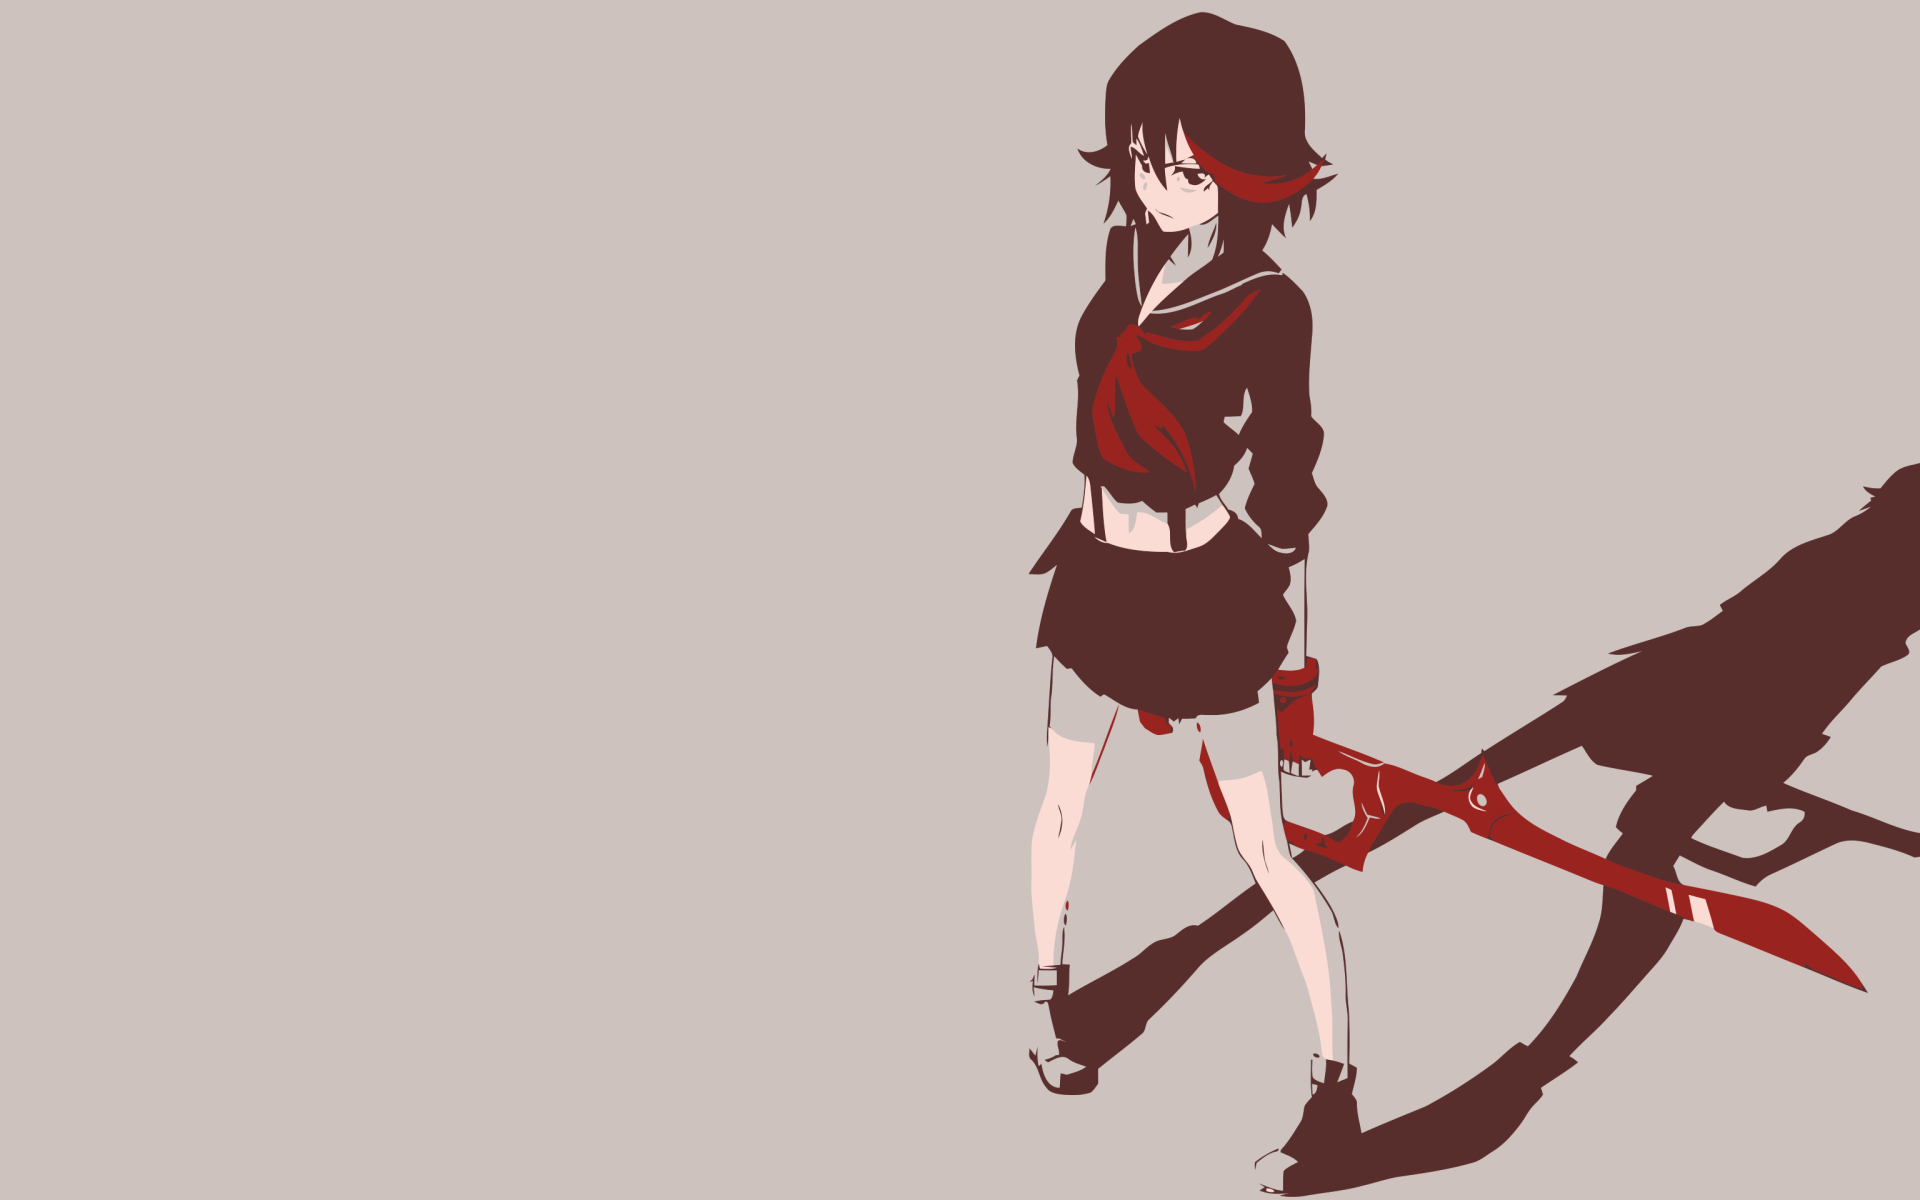 Minimalist Ryuko Matoi Wallpaper Explore The Mobile Wallpapers Associated With The Tag